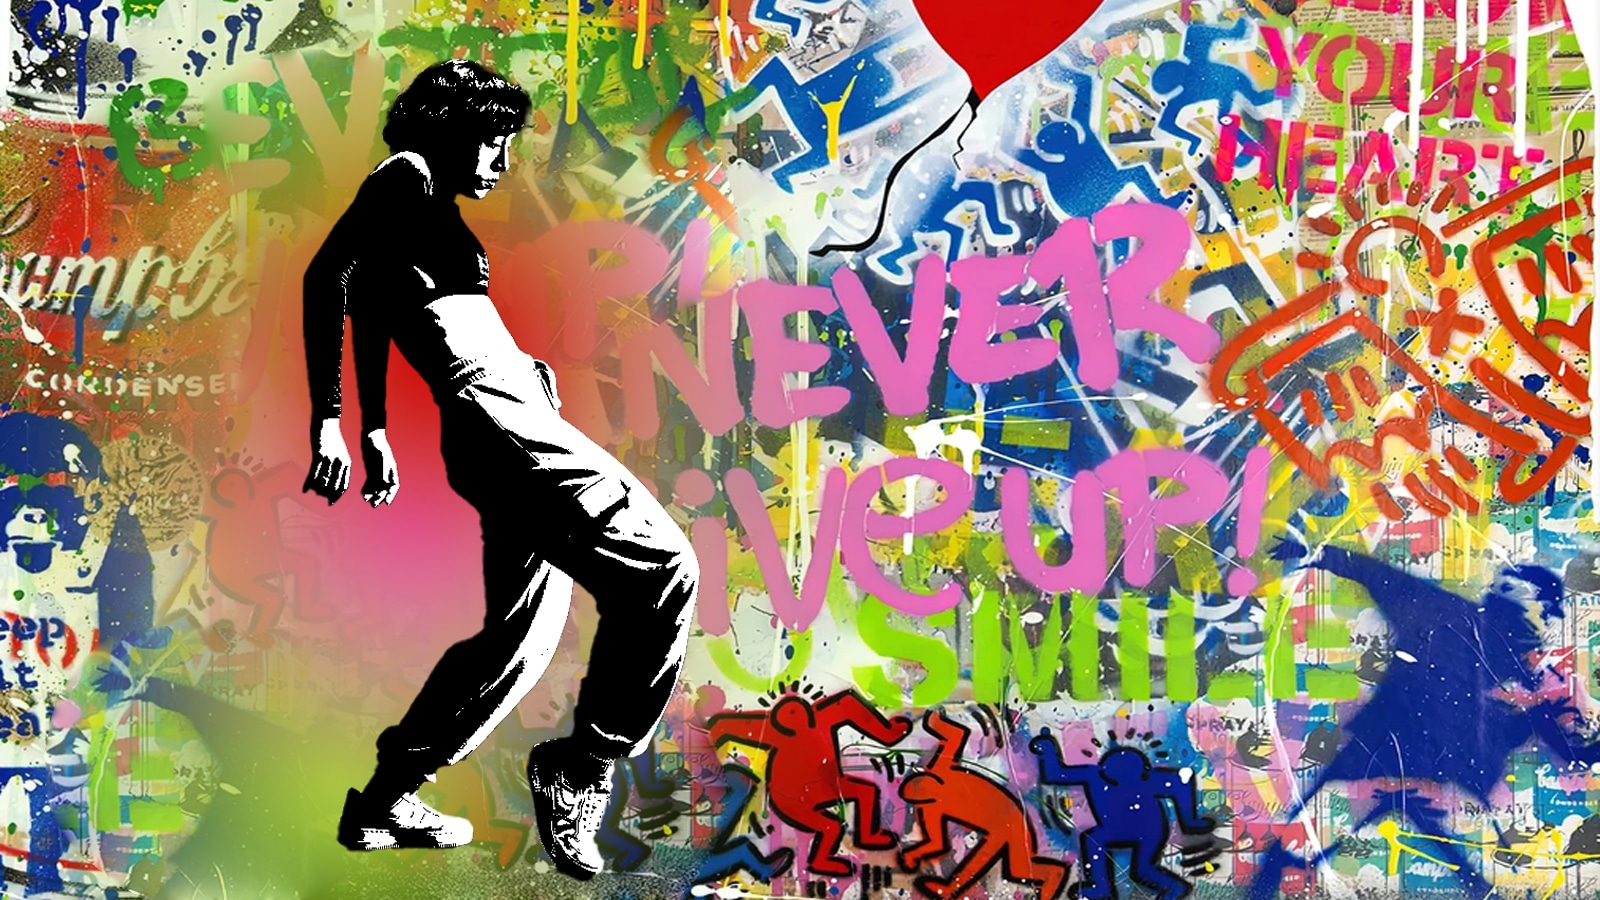 A black and white image of a person in a dance move in front of a graffiti art background